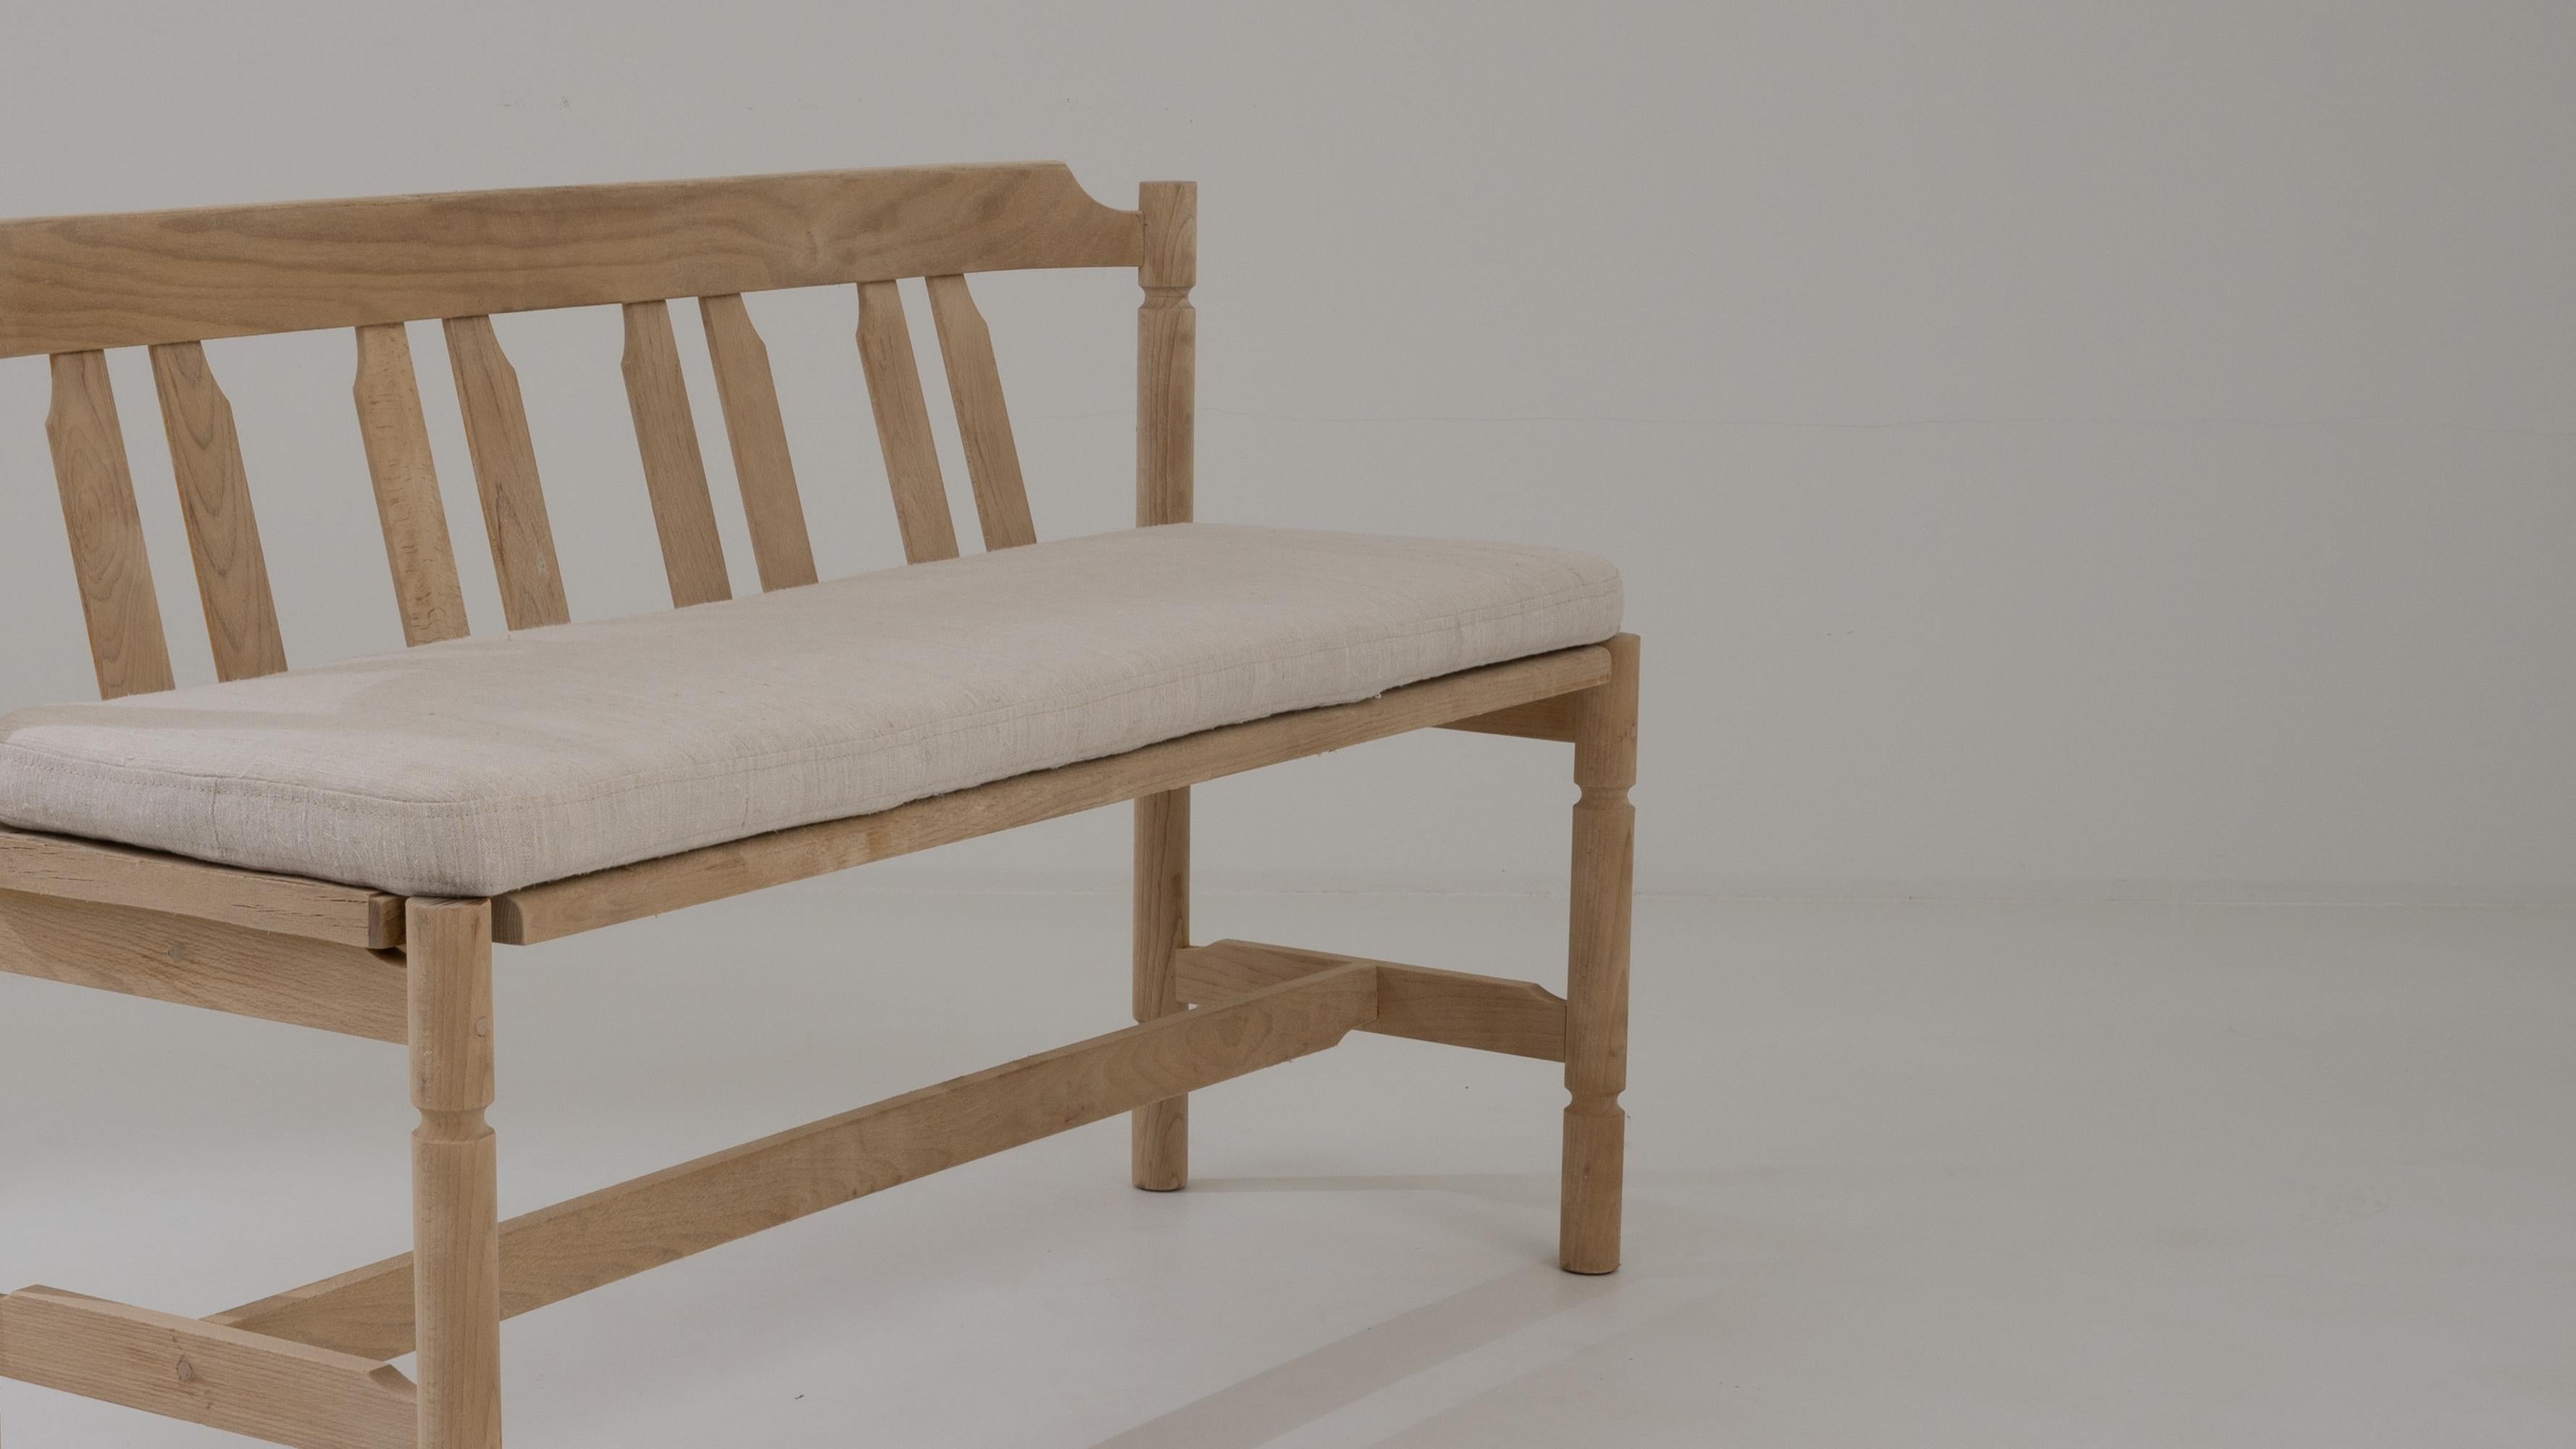 1920s Czech Country Upholstered Wooden Bench For Sale 5